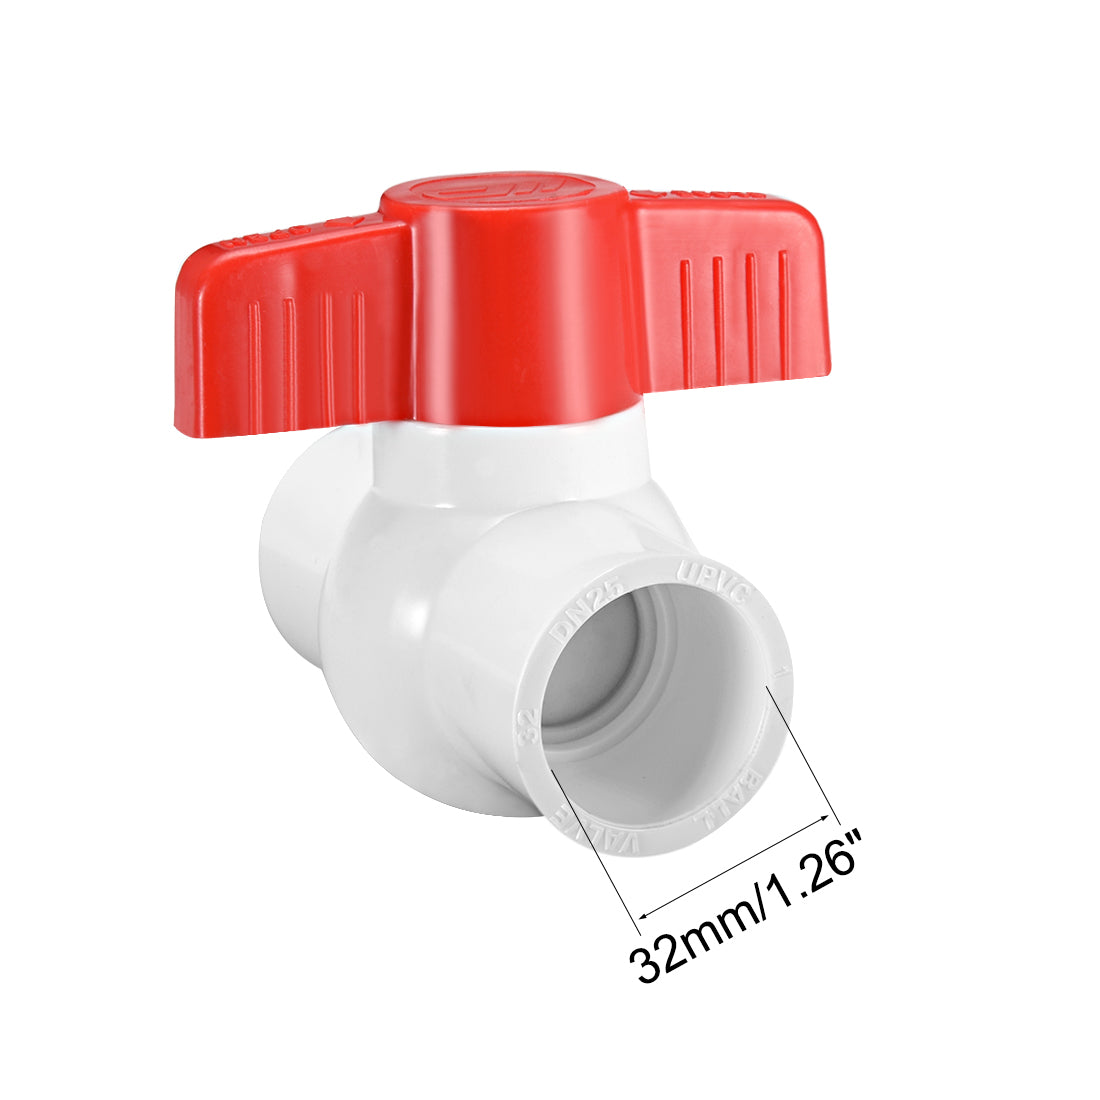 Uxcell Uxcell 32mm PVC Ball Valve for Water Supply Pipe, Slip Connection